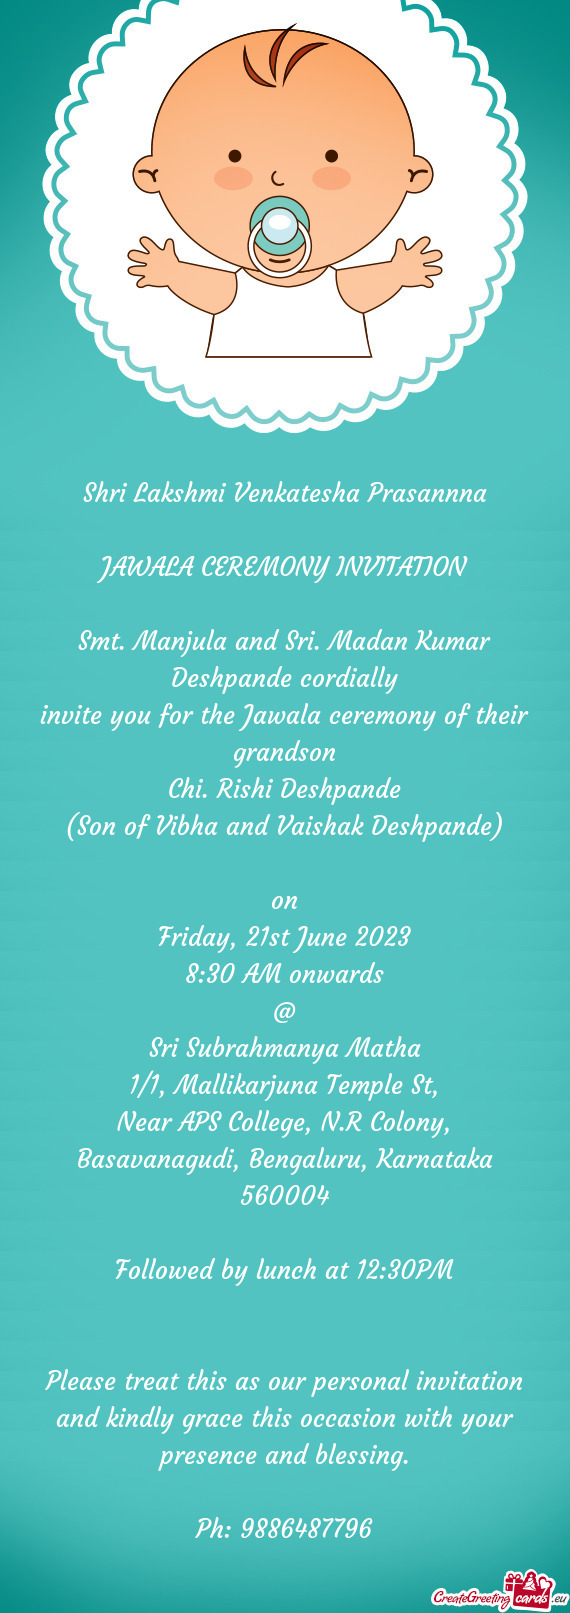 Invite you for the Jawala ceremony of their grandson